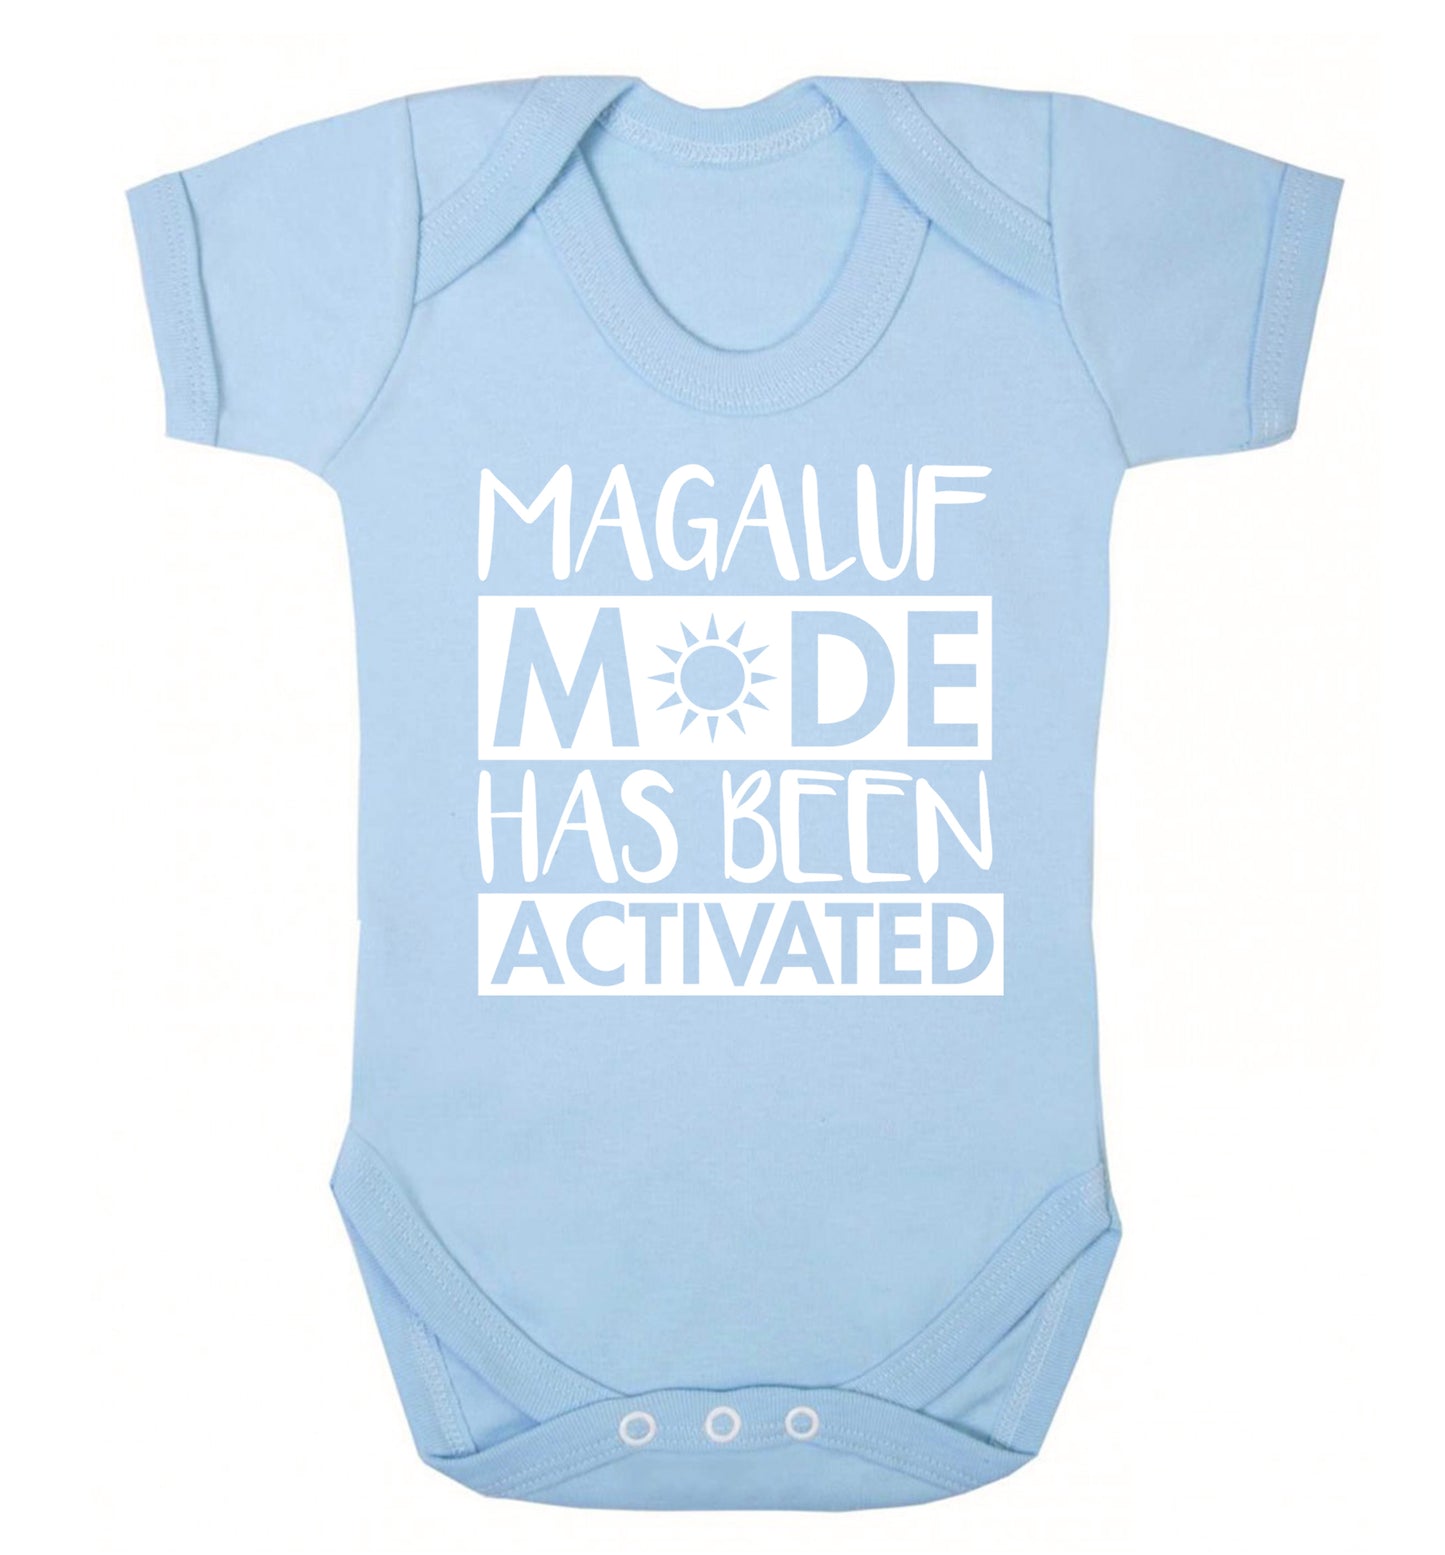 Magaluf mode has been activated Baby Vest pale blue 18-24 months